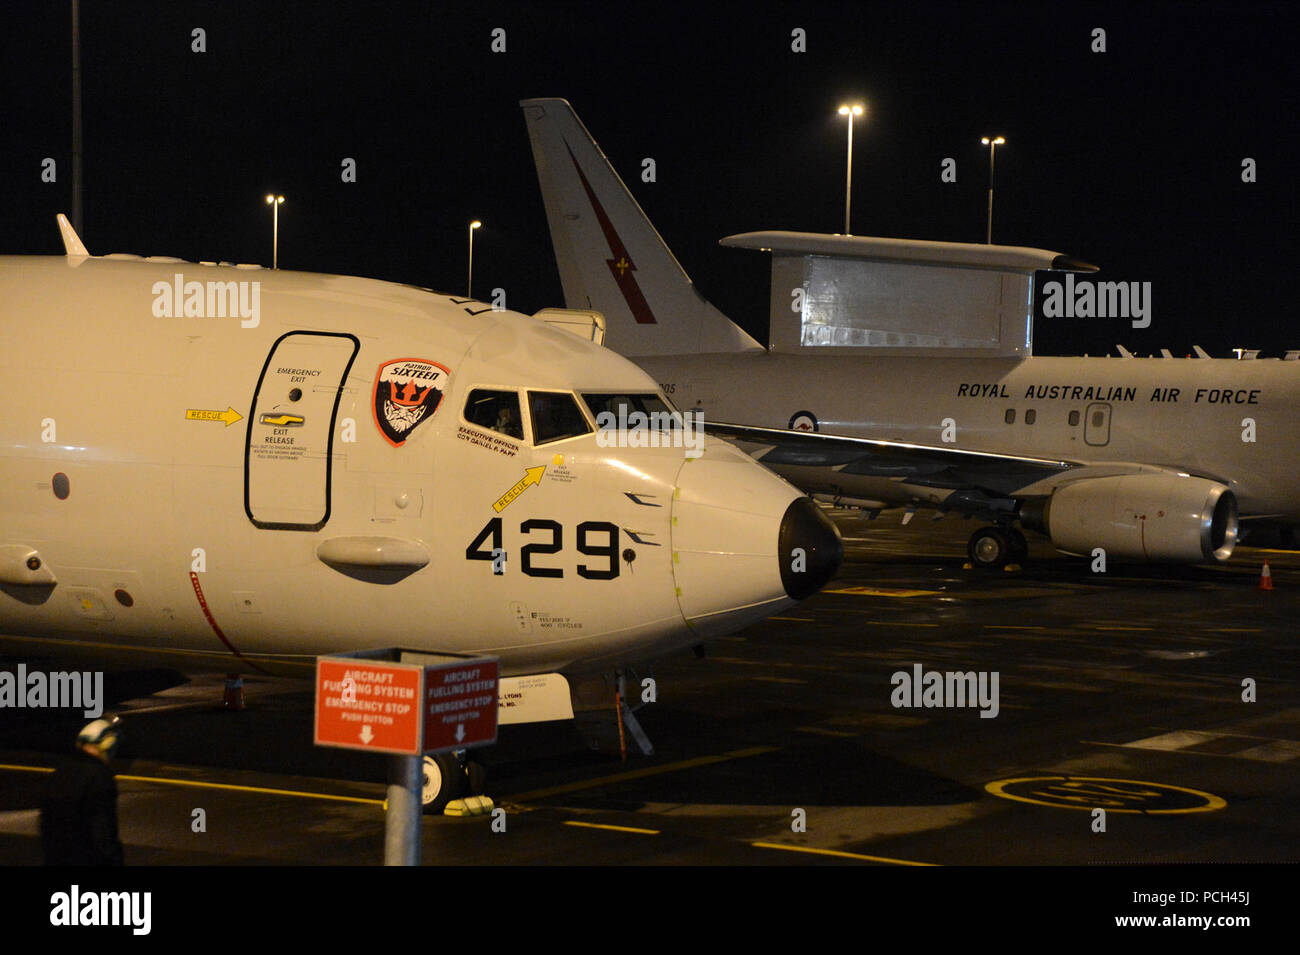 A P-8A Poseidon airplane from Patrol Squadron (VP) 16 sits next to a Royal Australian Air Force E-7A Wedgetail airplane at Perth Airport. Both planes are being utilized for the international effort to locate Malaysia Airlines flight MH370. VP-16 is deployed in the U.S. 7th Fleet area of responsibility supporting security and stability in the Indo-Asia-Pacific region. Stock Photo